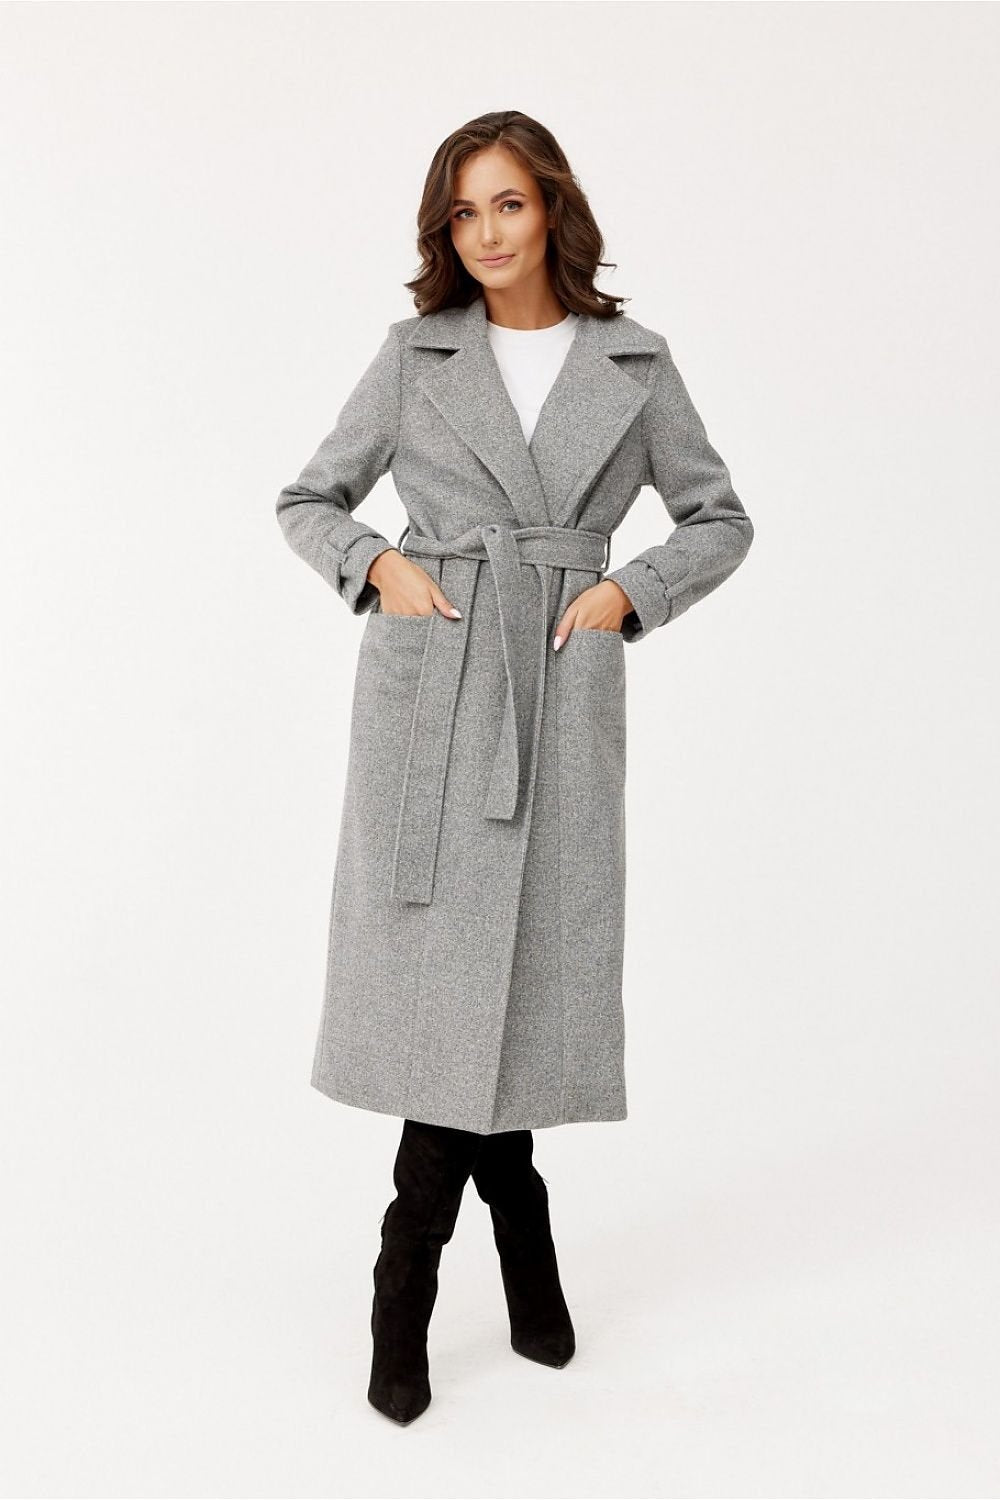 Livvy Long Downtown Coat - Heather Gray